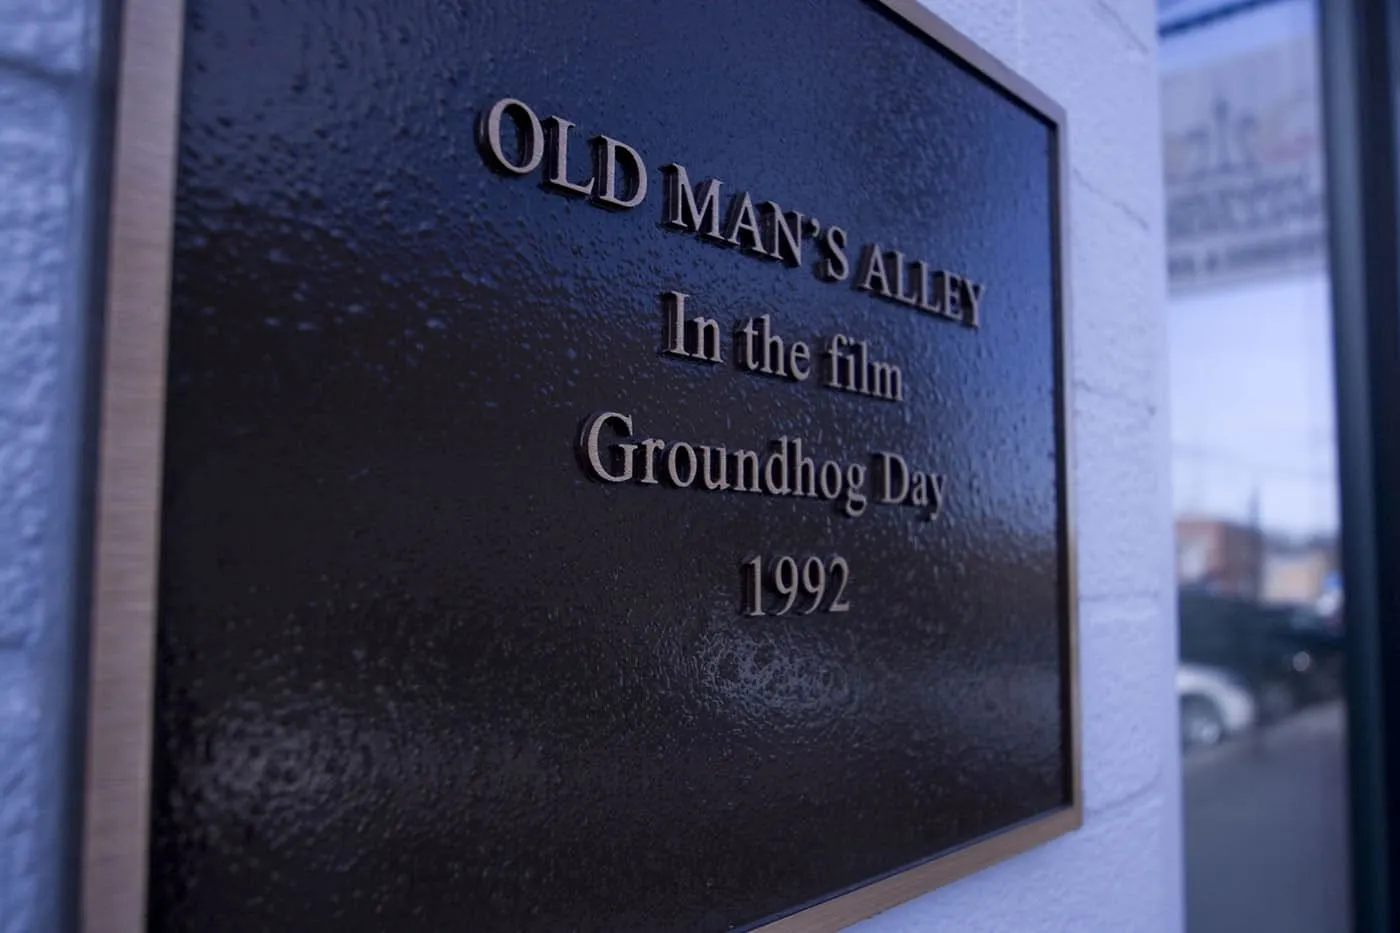 Alley where Phil finds the old man dead - Groundhog Day Movie Filming Locations in Woodstock, Illinois